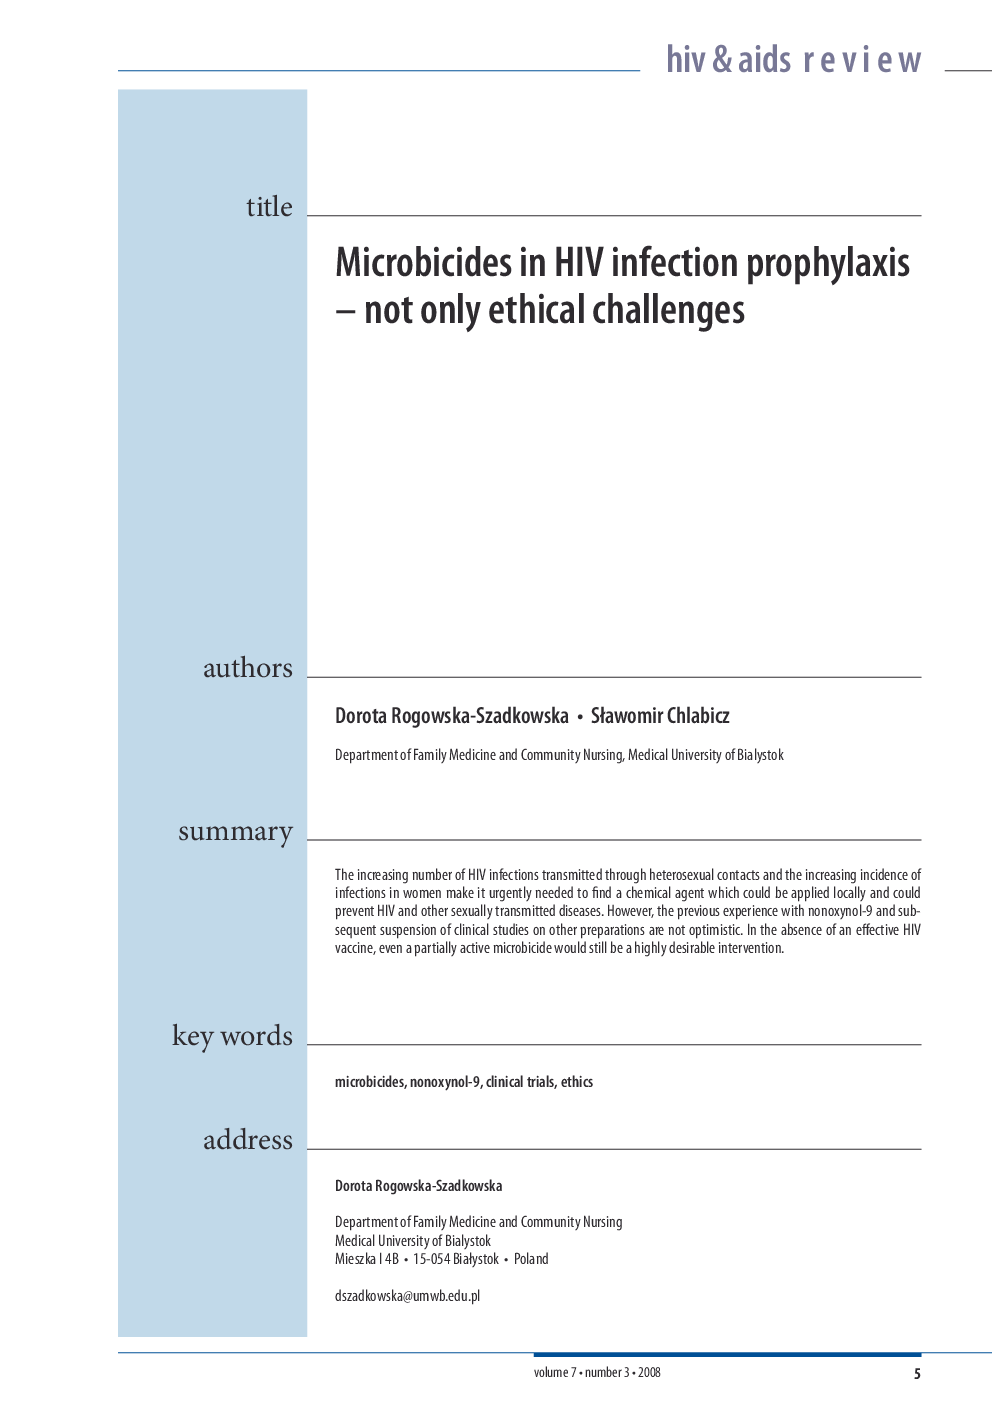 Microbicides in HIV infection prophylaxis – not only ethical challenges